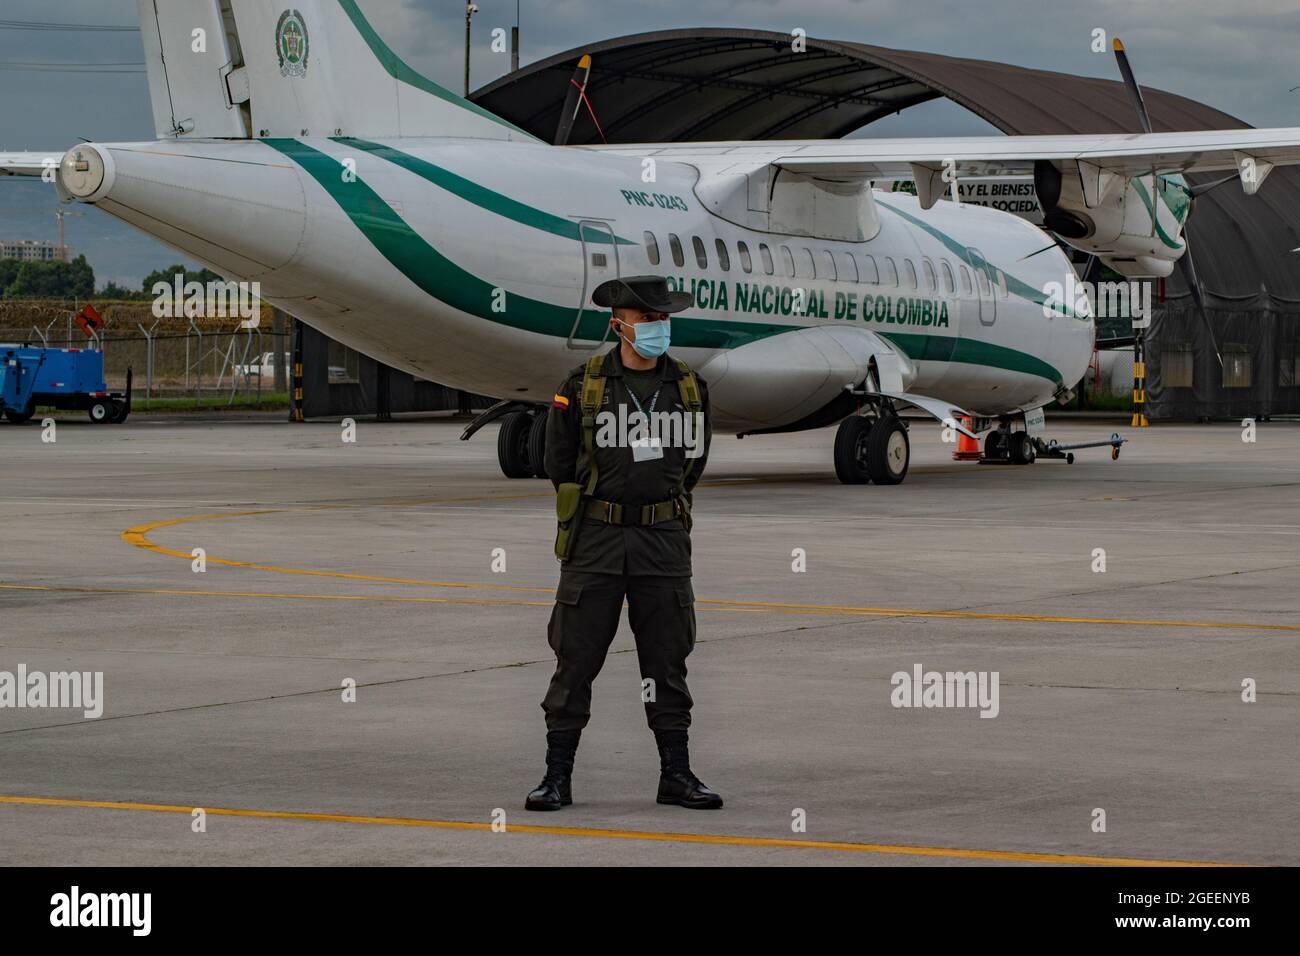 Bogota, Colombia. 19th Aug, 2021. A anti-narcotics police officer stands in front of a Colombian police plane as Yamit picon Rodriguez alias 'CHONCHA' Henry Trigos Celon alias 'HENRY' both from the ELN Guerrilla and Alexander Montoya Usuga alias 'El Flaco' from the Gulf Clan 'Clan del Golfo' are scorted by Interpol Police and Colombia's police prior to their extradition to the United States, in the CATAM army base in Bogota, Colombia on August 19, 2021. Credit: Long Visual Press/Alamy Live News Stock Photo